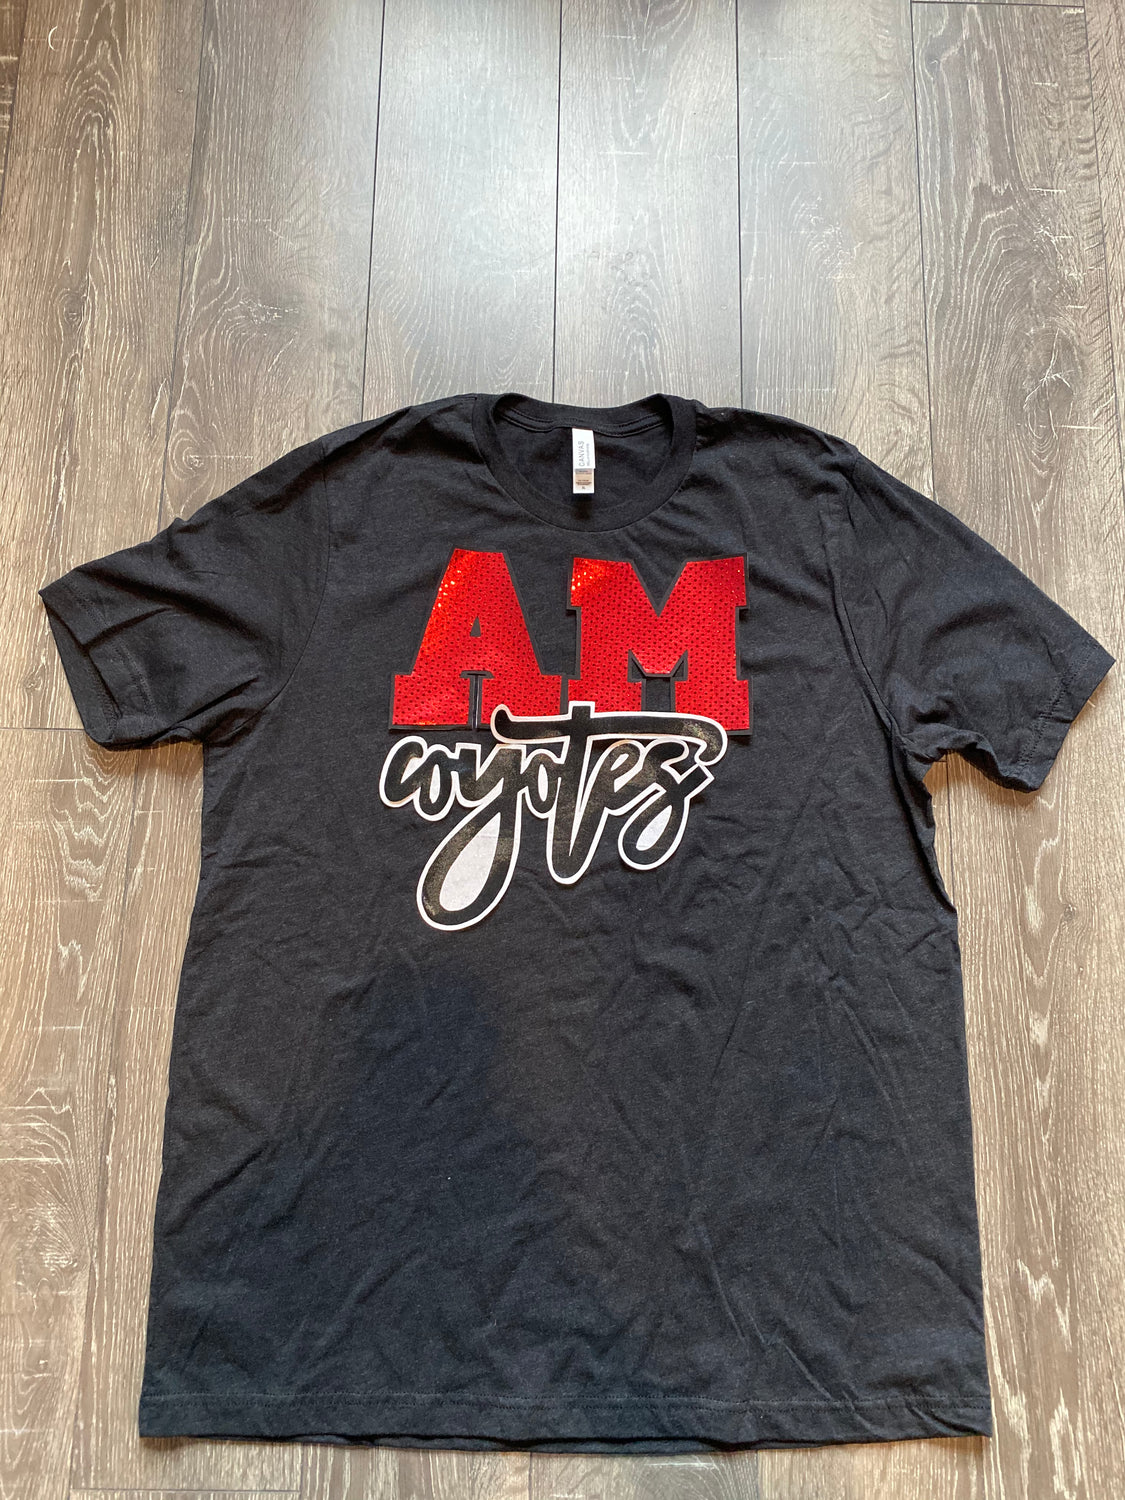 A-M COYOTES UNISEX TEE